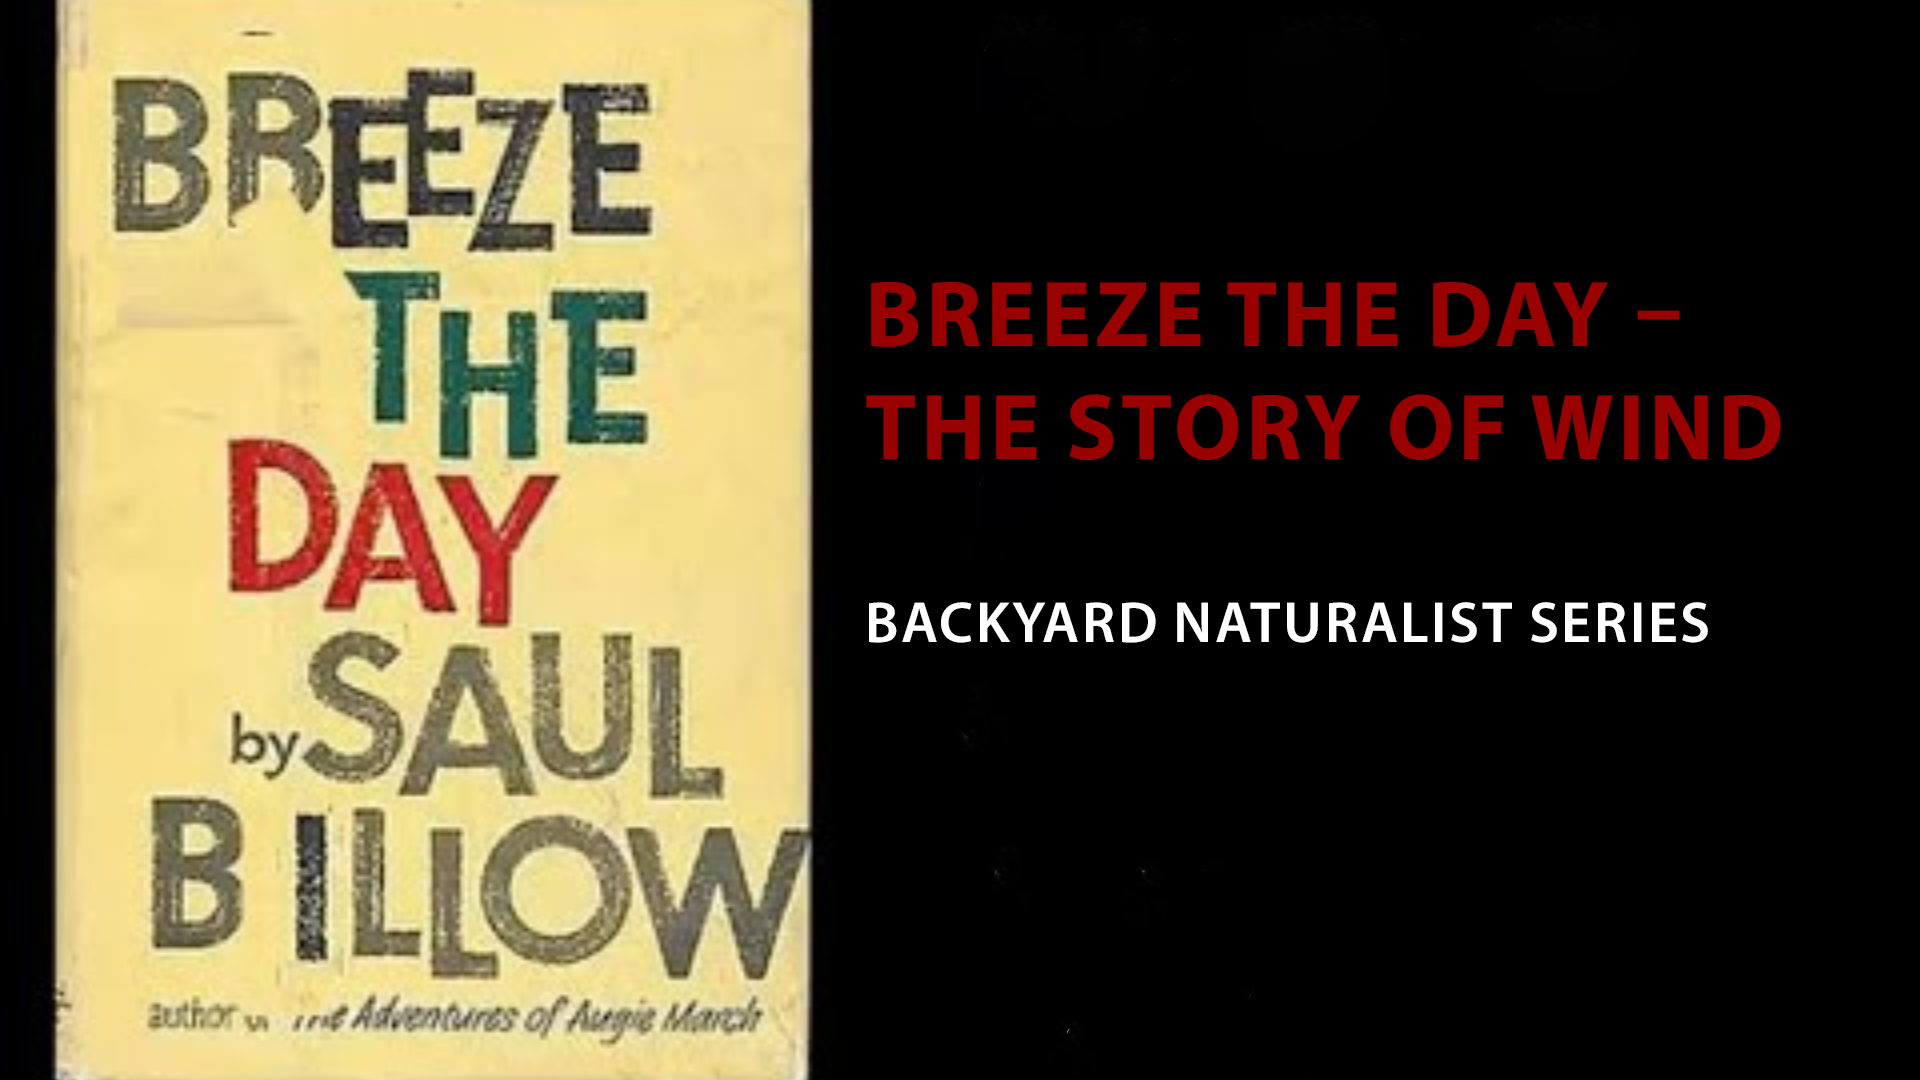 Breeze the Day - The Story of Wind - Backyard Naturalist Series